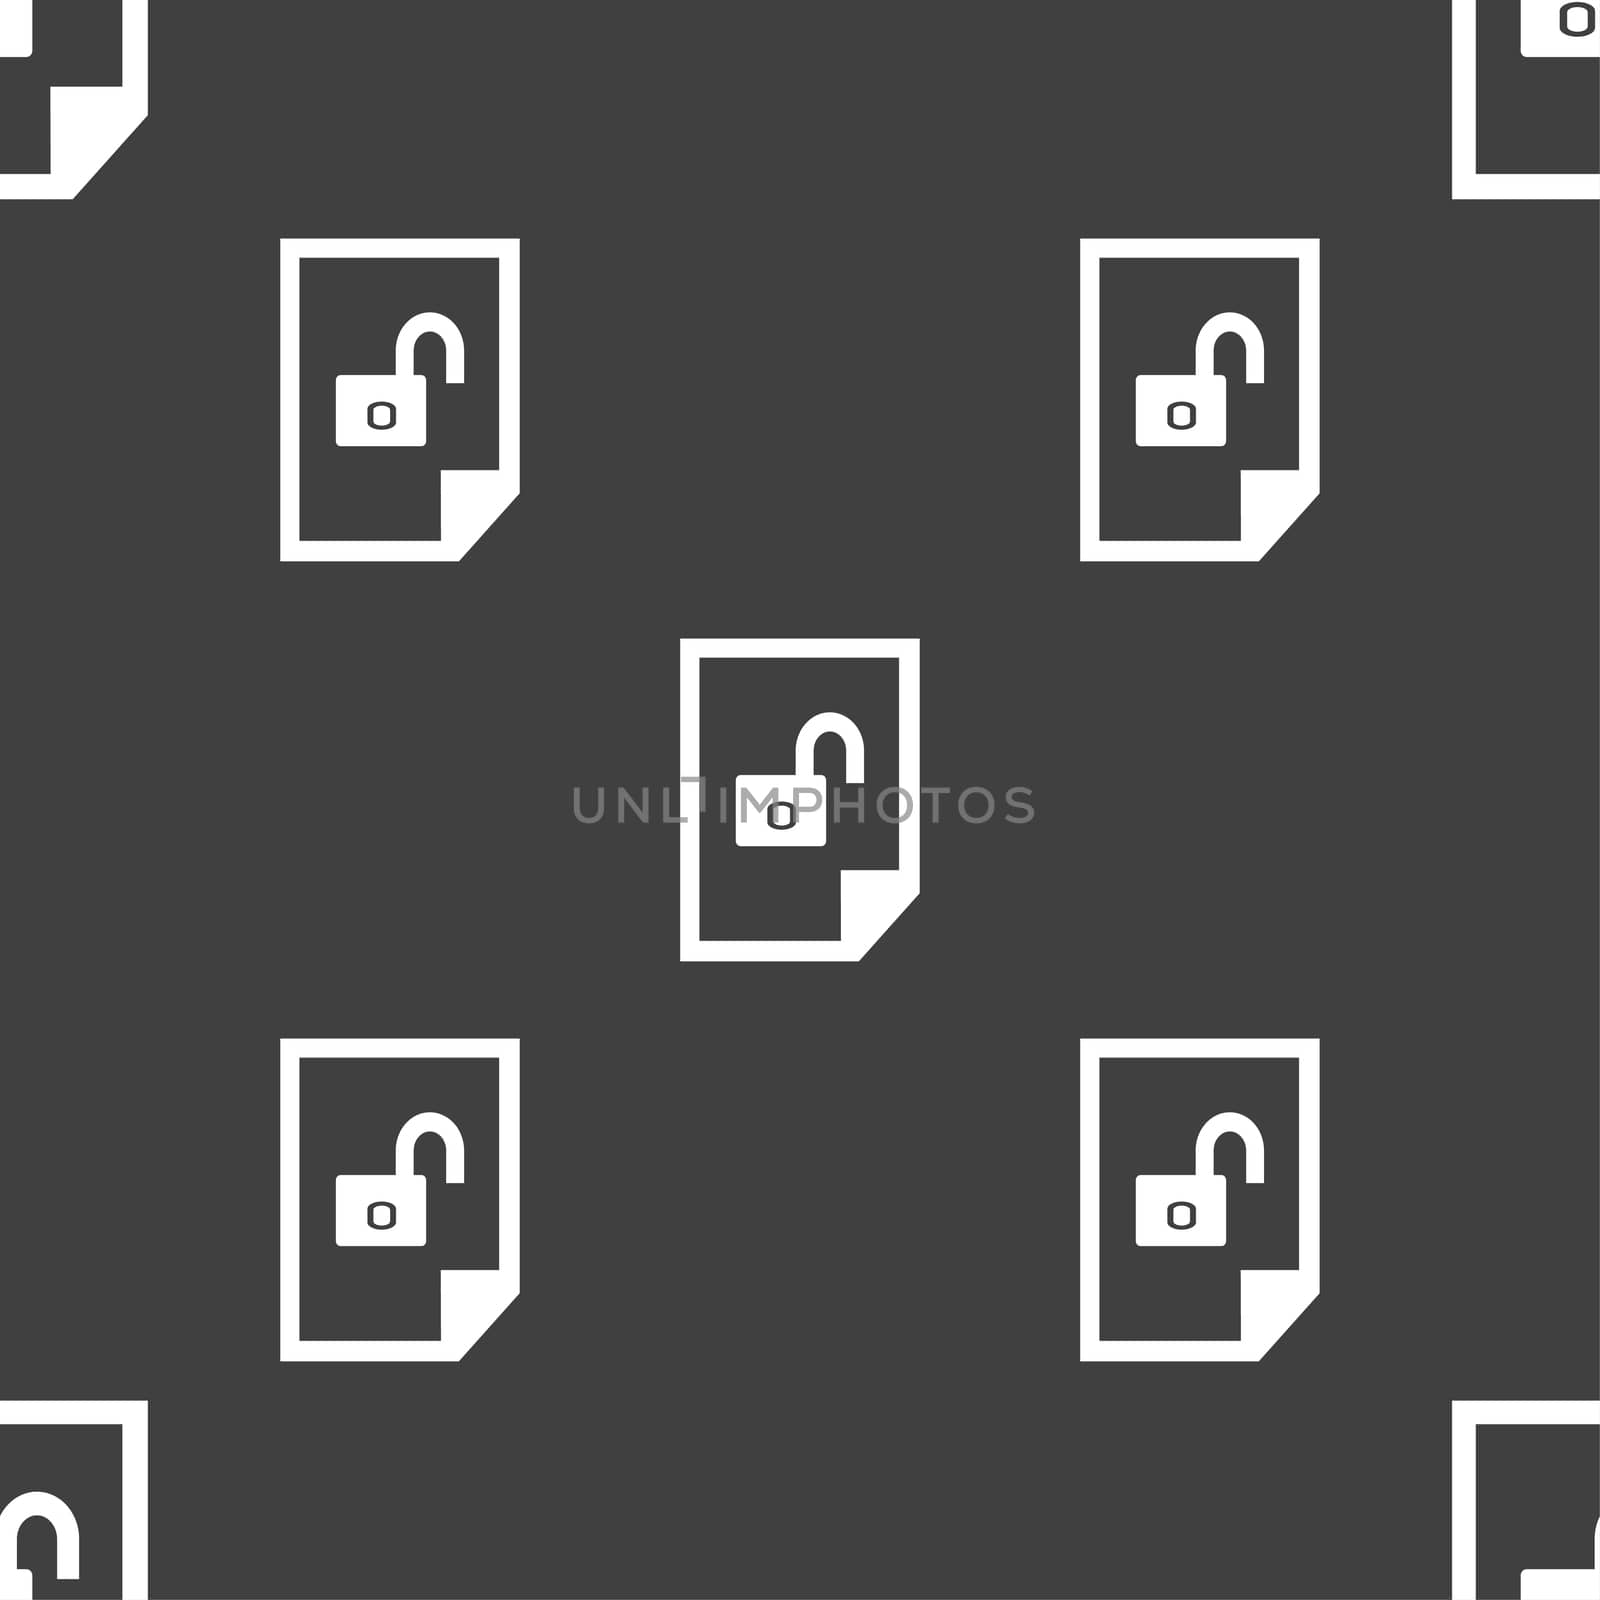 File unlocked icon sign. Seamless pattern on a gray background. illustration